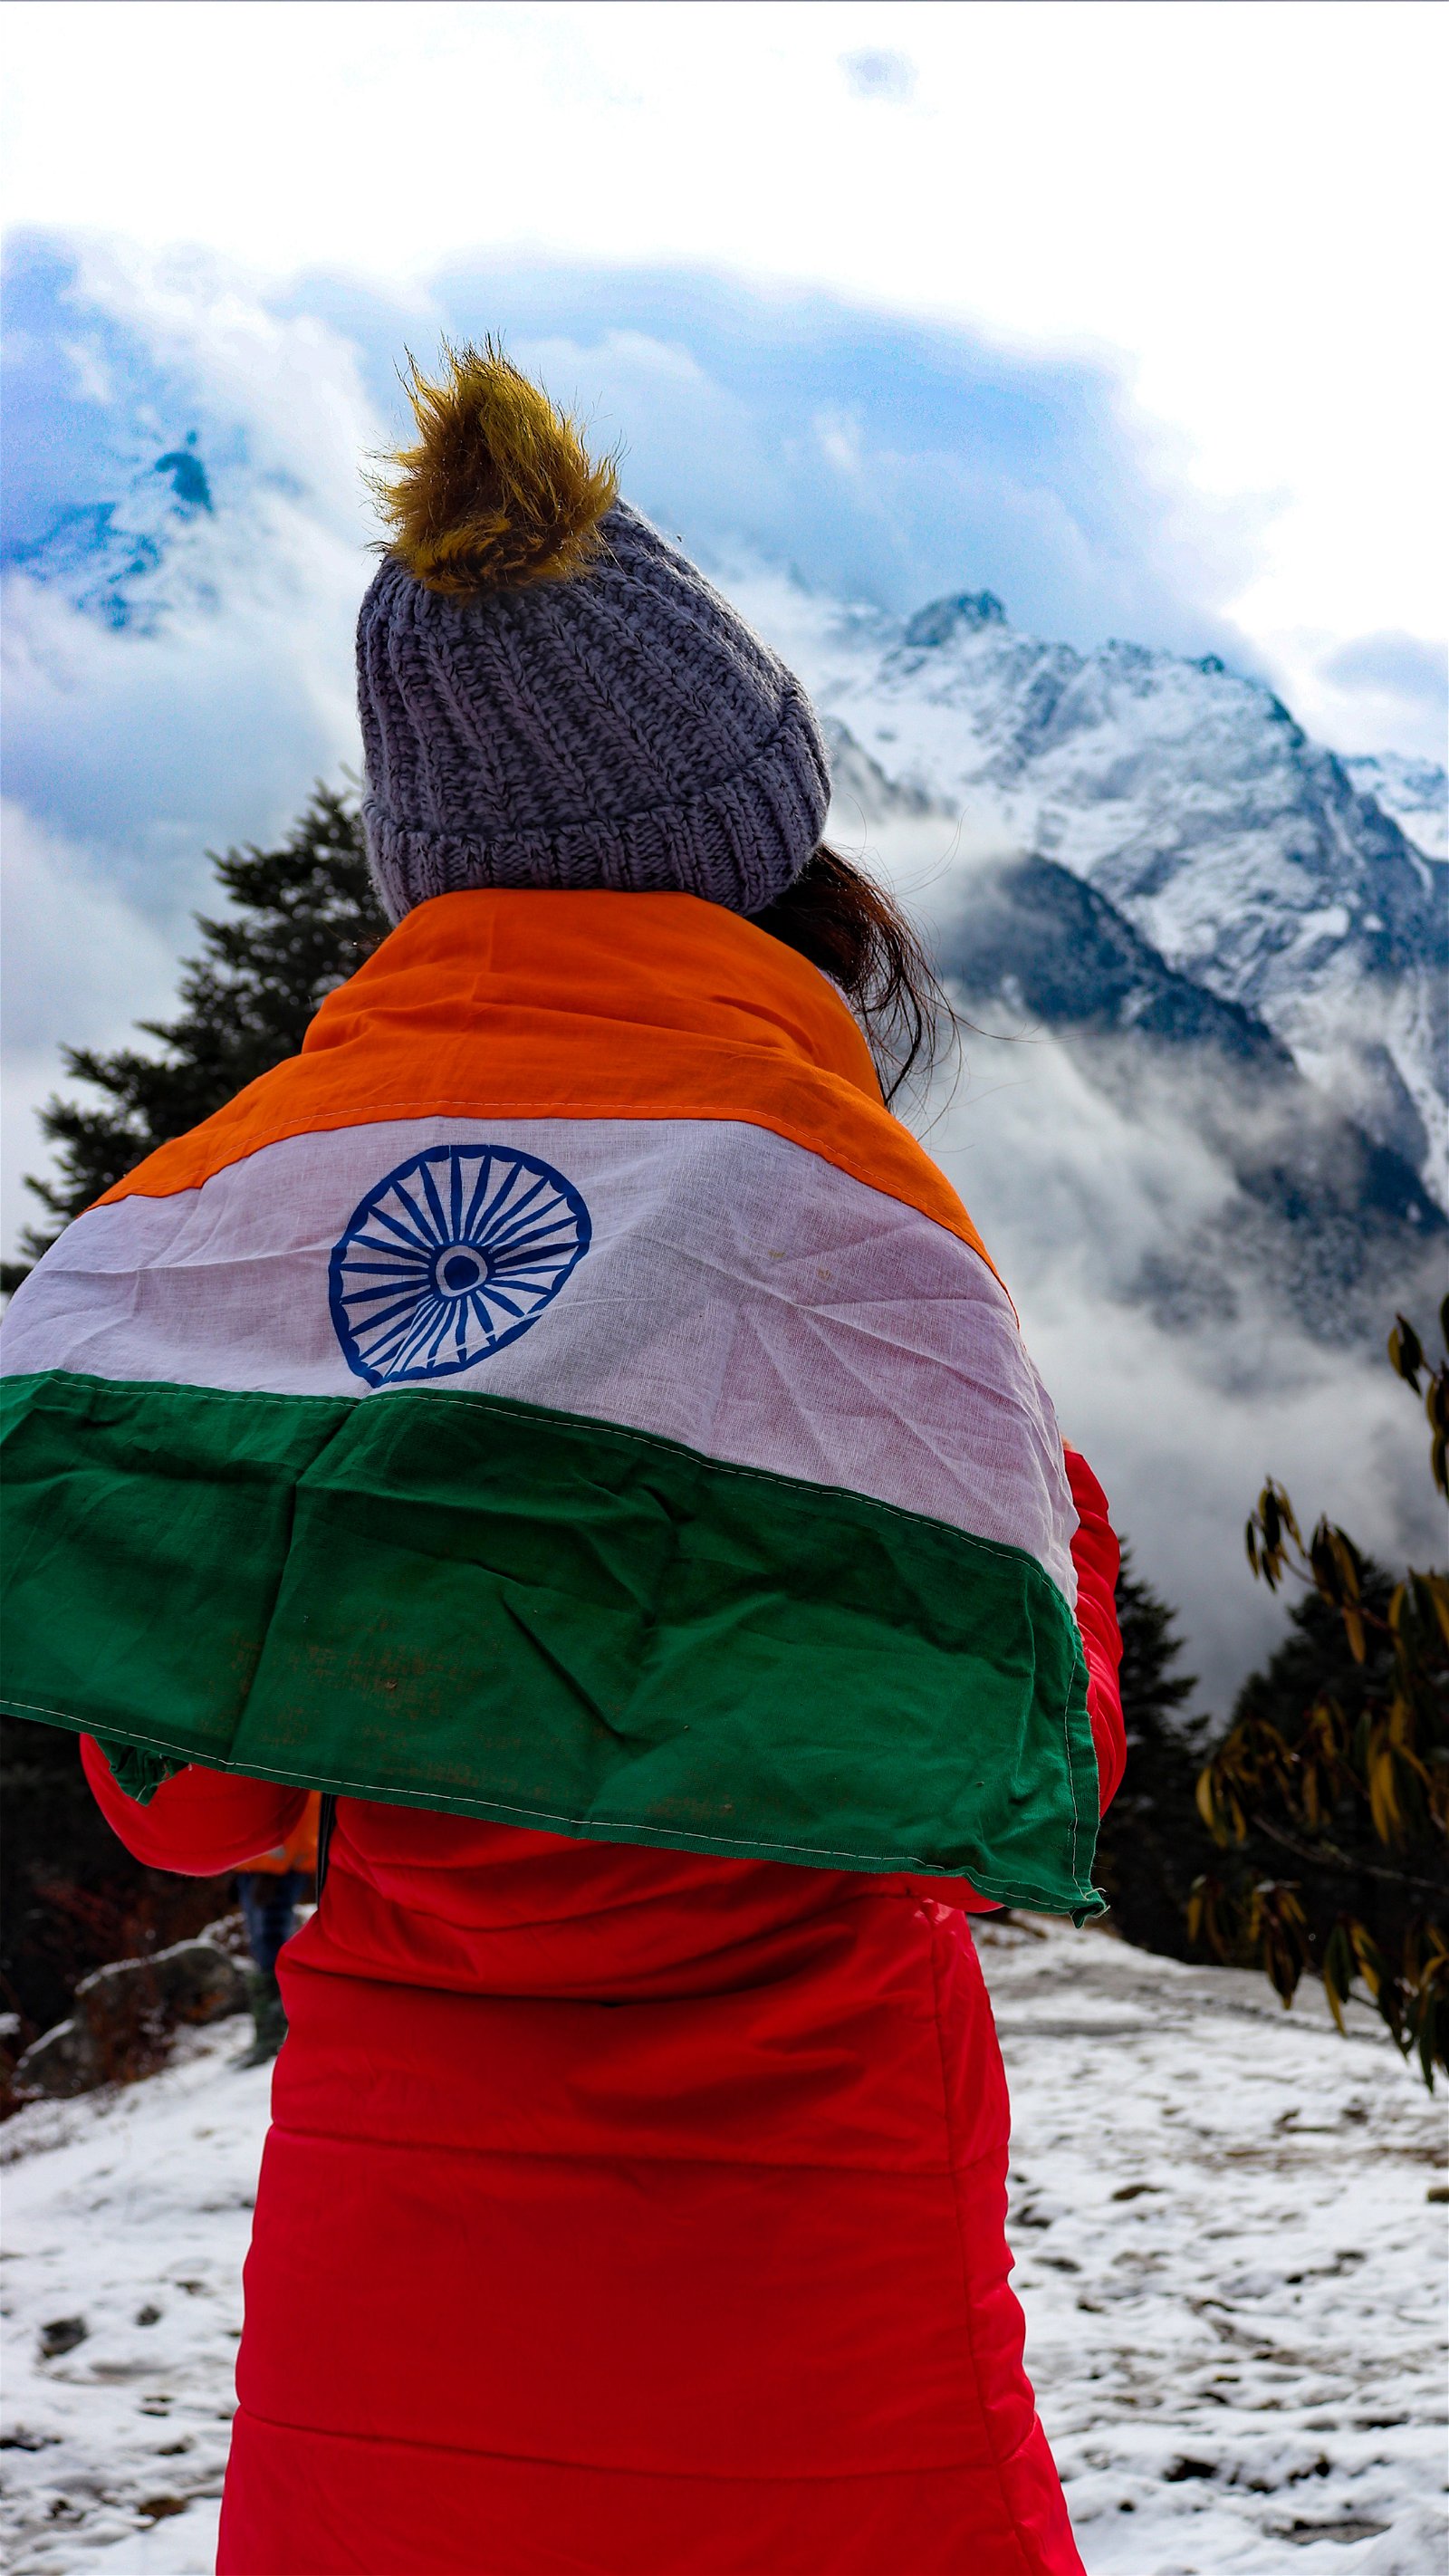 Girl with Indian Flag